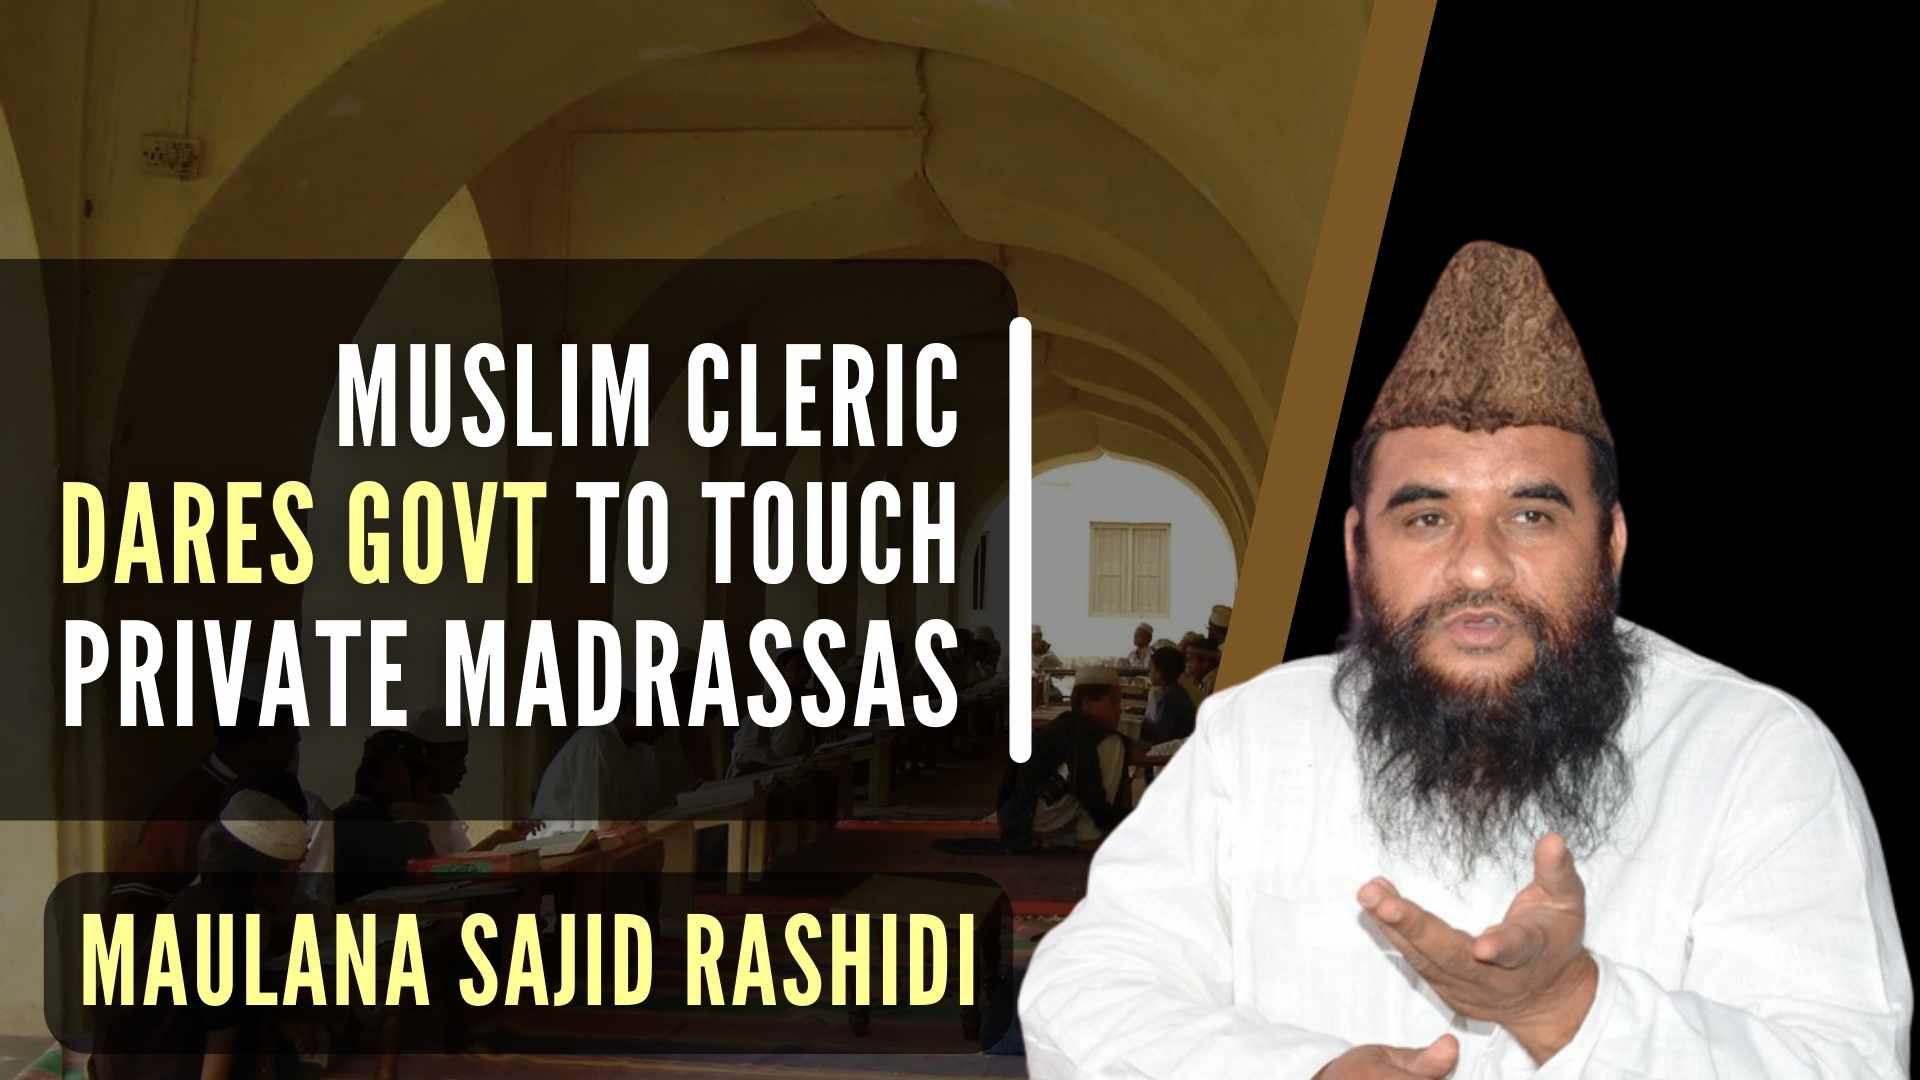 A Muslim cleric made a controversial statement saying the governments dared to touch the private madrassas, the country will burn